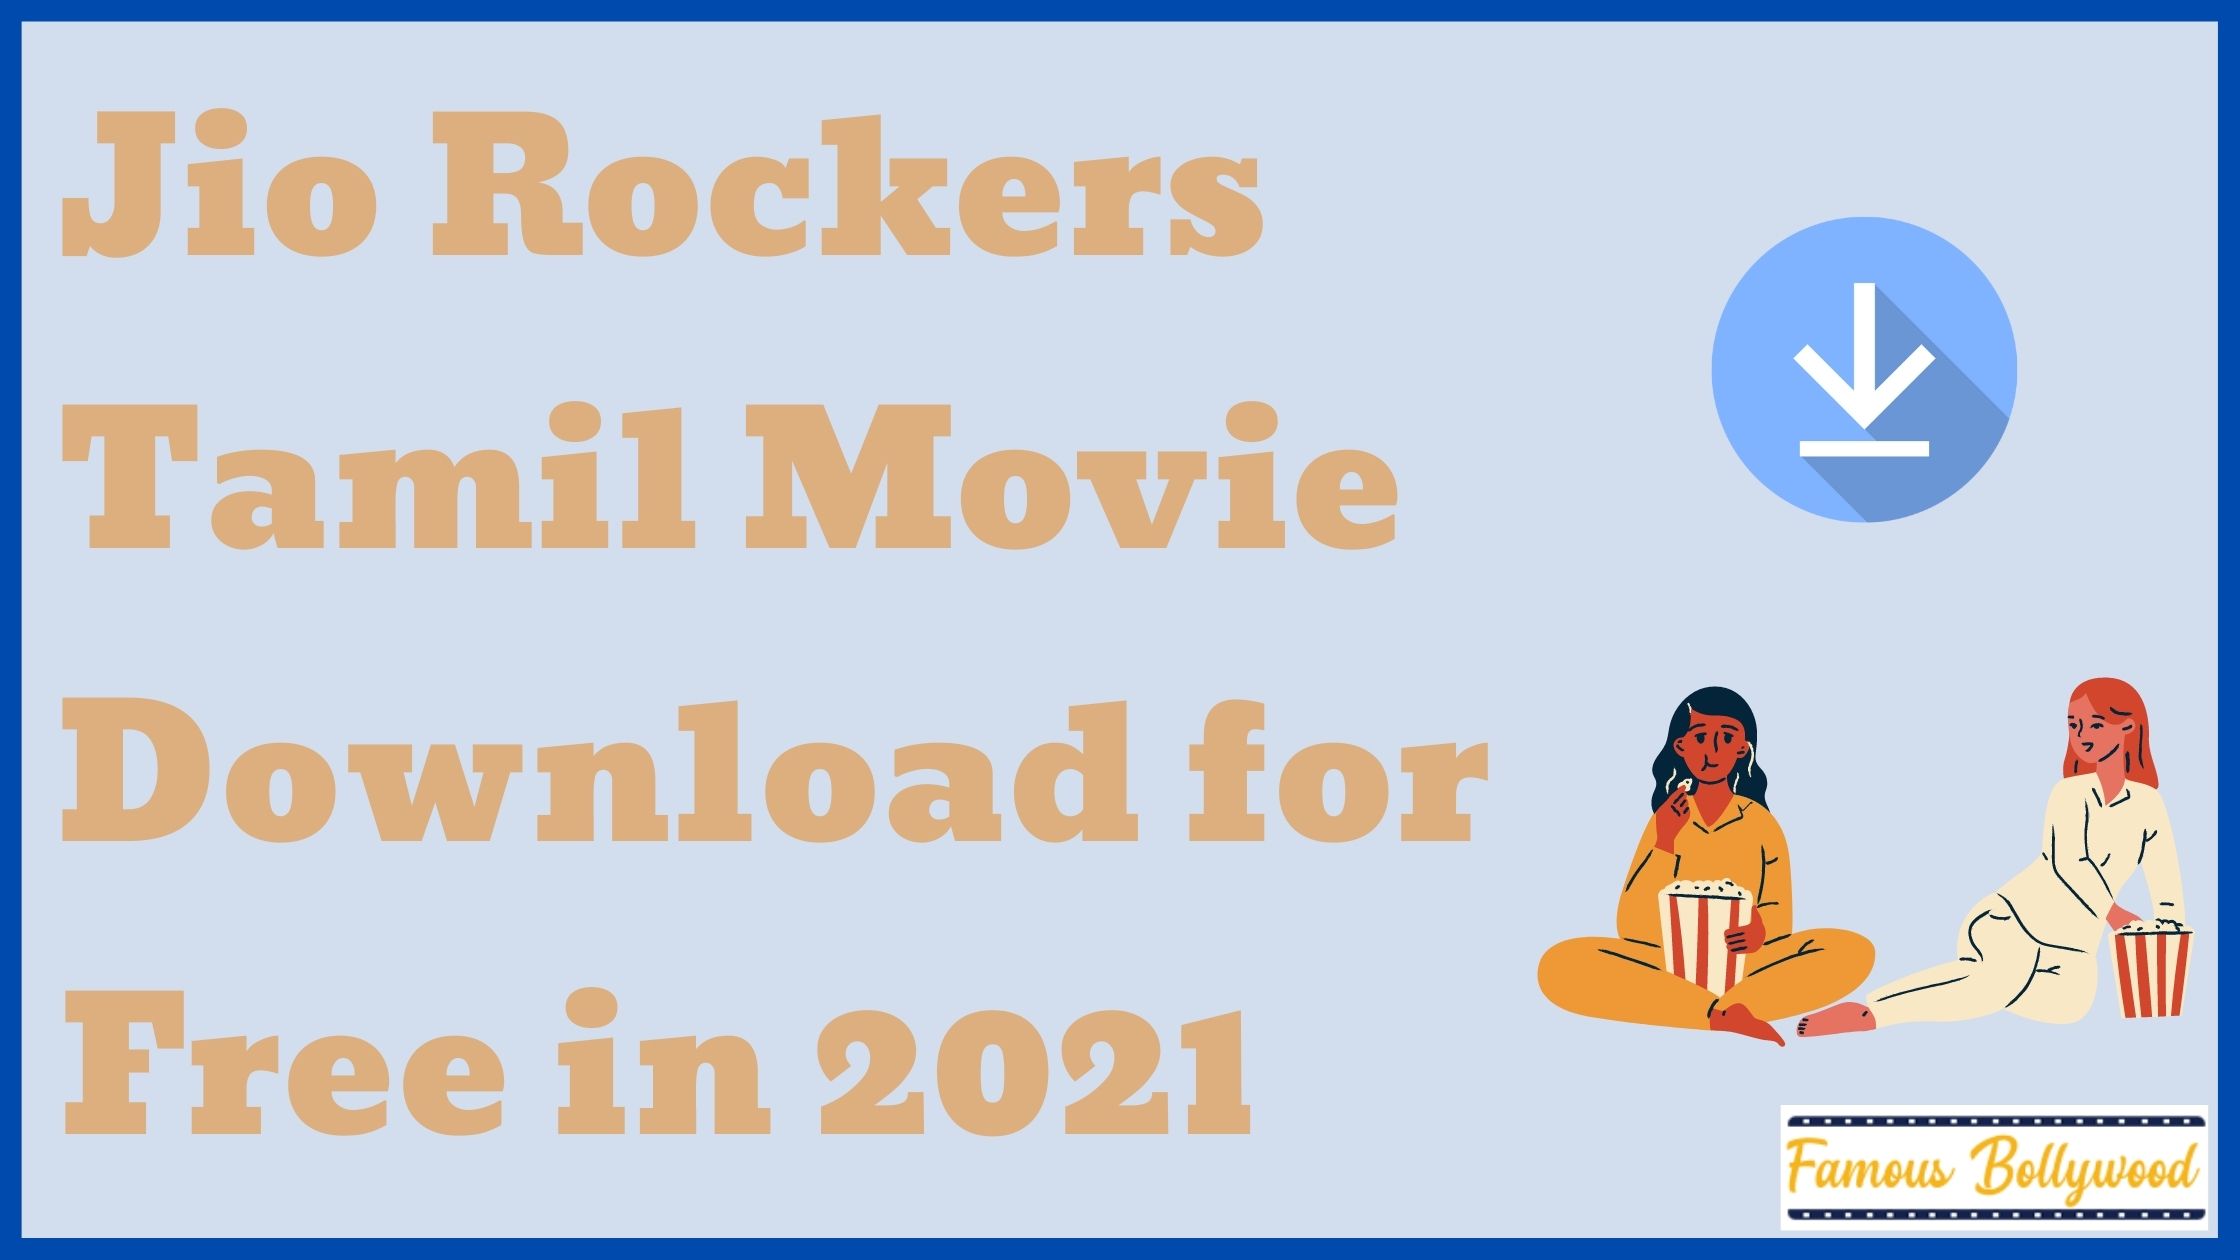 Jio Rockers Tamil Movie Download for Free in 2021